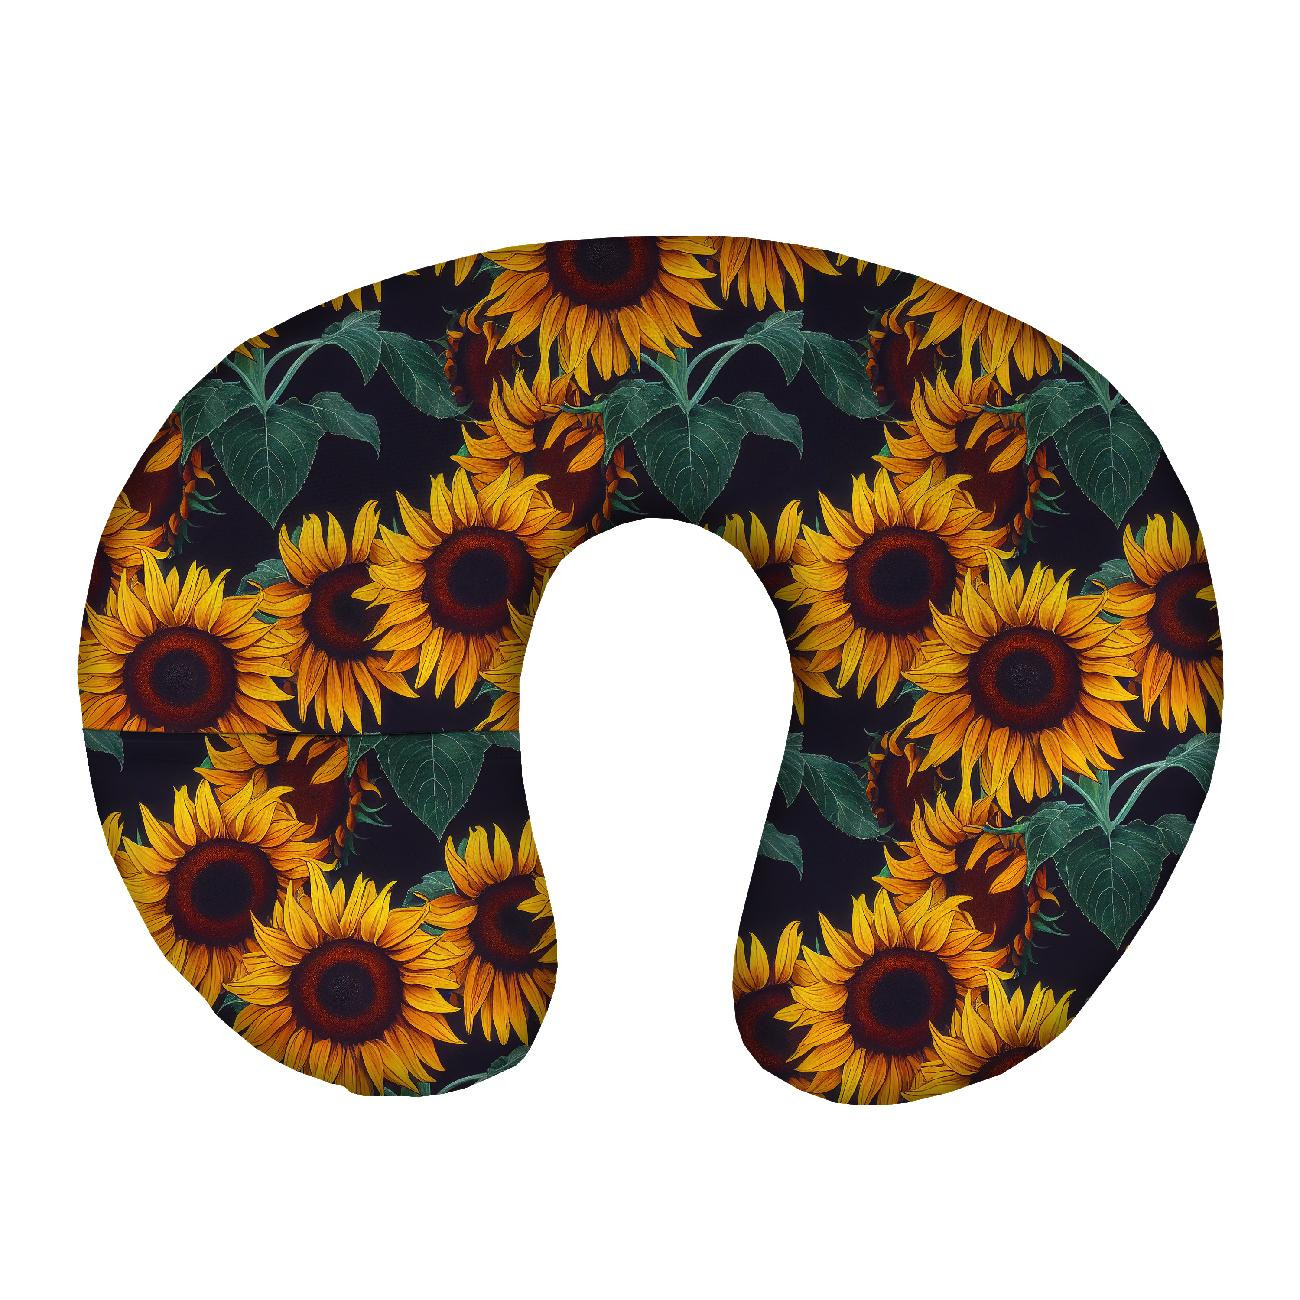 NECK PILLOW - PAINTED SUNFLOWERS pat. 1 - sewing set